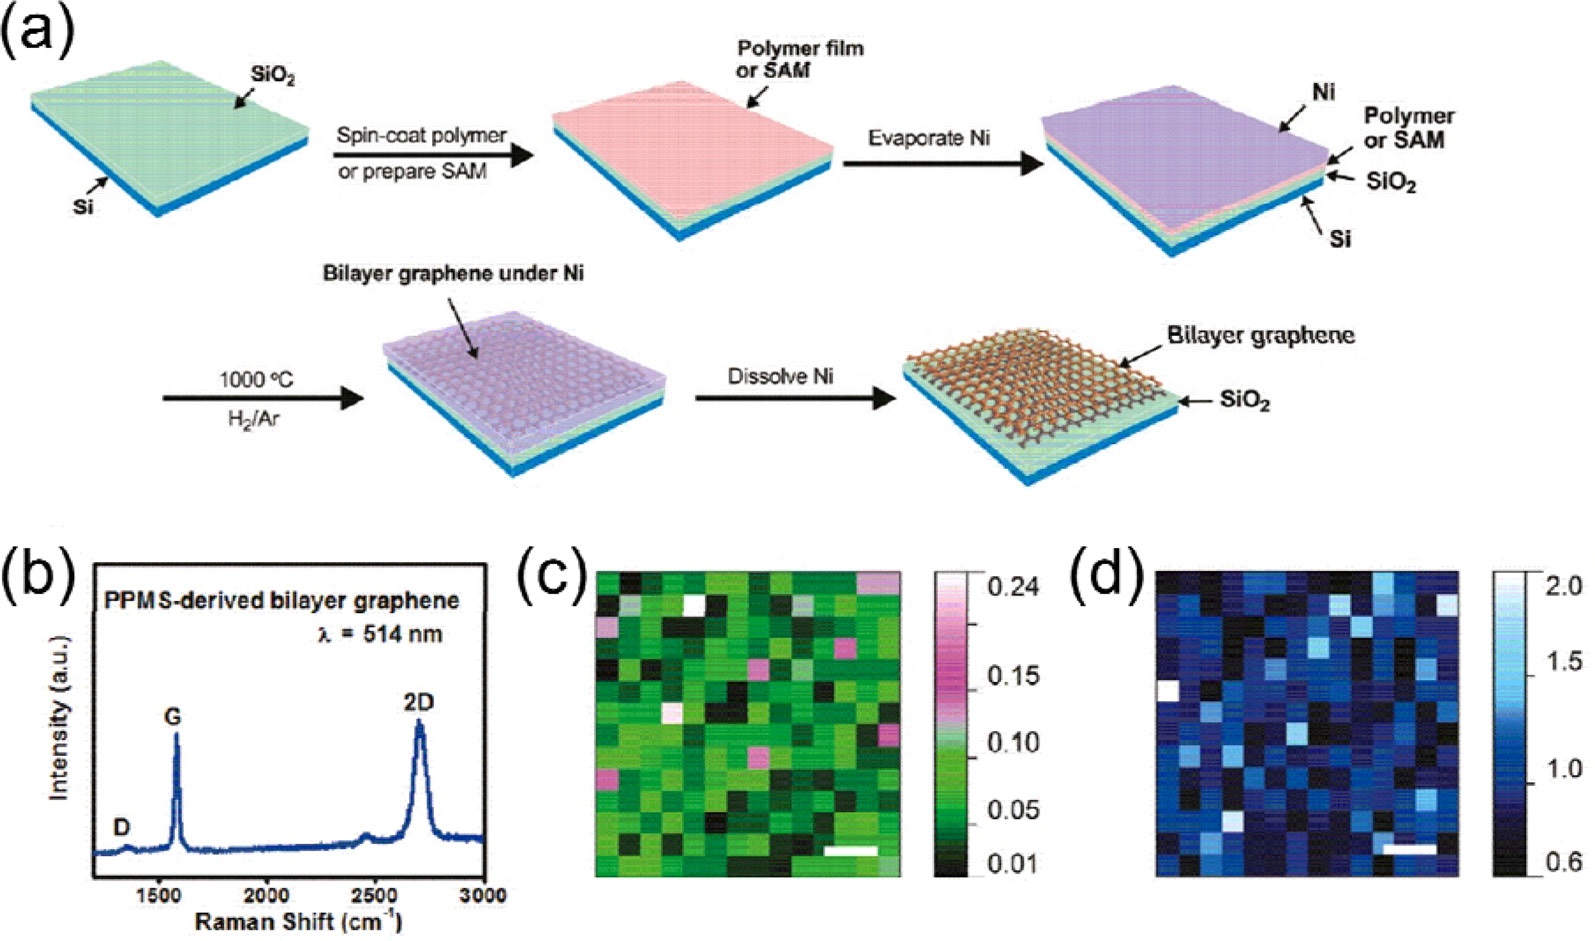 (a) Bilayer graphene grown directly on a SiO2/Si substrate from a solid polymer or self-assembled monolayer (SAM) film by annealing the sample under an Ar-H2 gas mix at 1000℃ for 15 min; (b) Raman spectrum (514-nm excitation) of PPMS-derived bilayer graphene; two-dimensional (2D) Raman (514 nm) mapping of the bilayer graphene film (112 × 112 μm2): (c) D/G peak ratio; (d) G/2D peak ratio. The color gradient bar is to the right of each map, and the scale bars are equivalent to 20 μm in (c) and (d) [38] (Reprinted with permission. Copyright 2011, American Chemical Society). PPMS: poly(2-phenylpropyl)methylsiloxane.